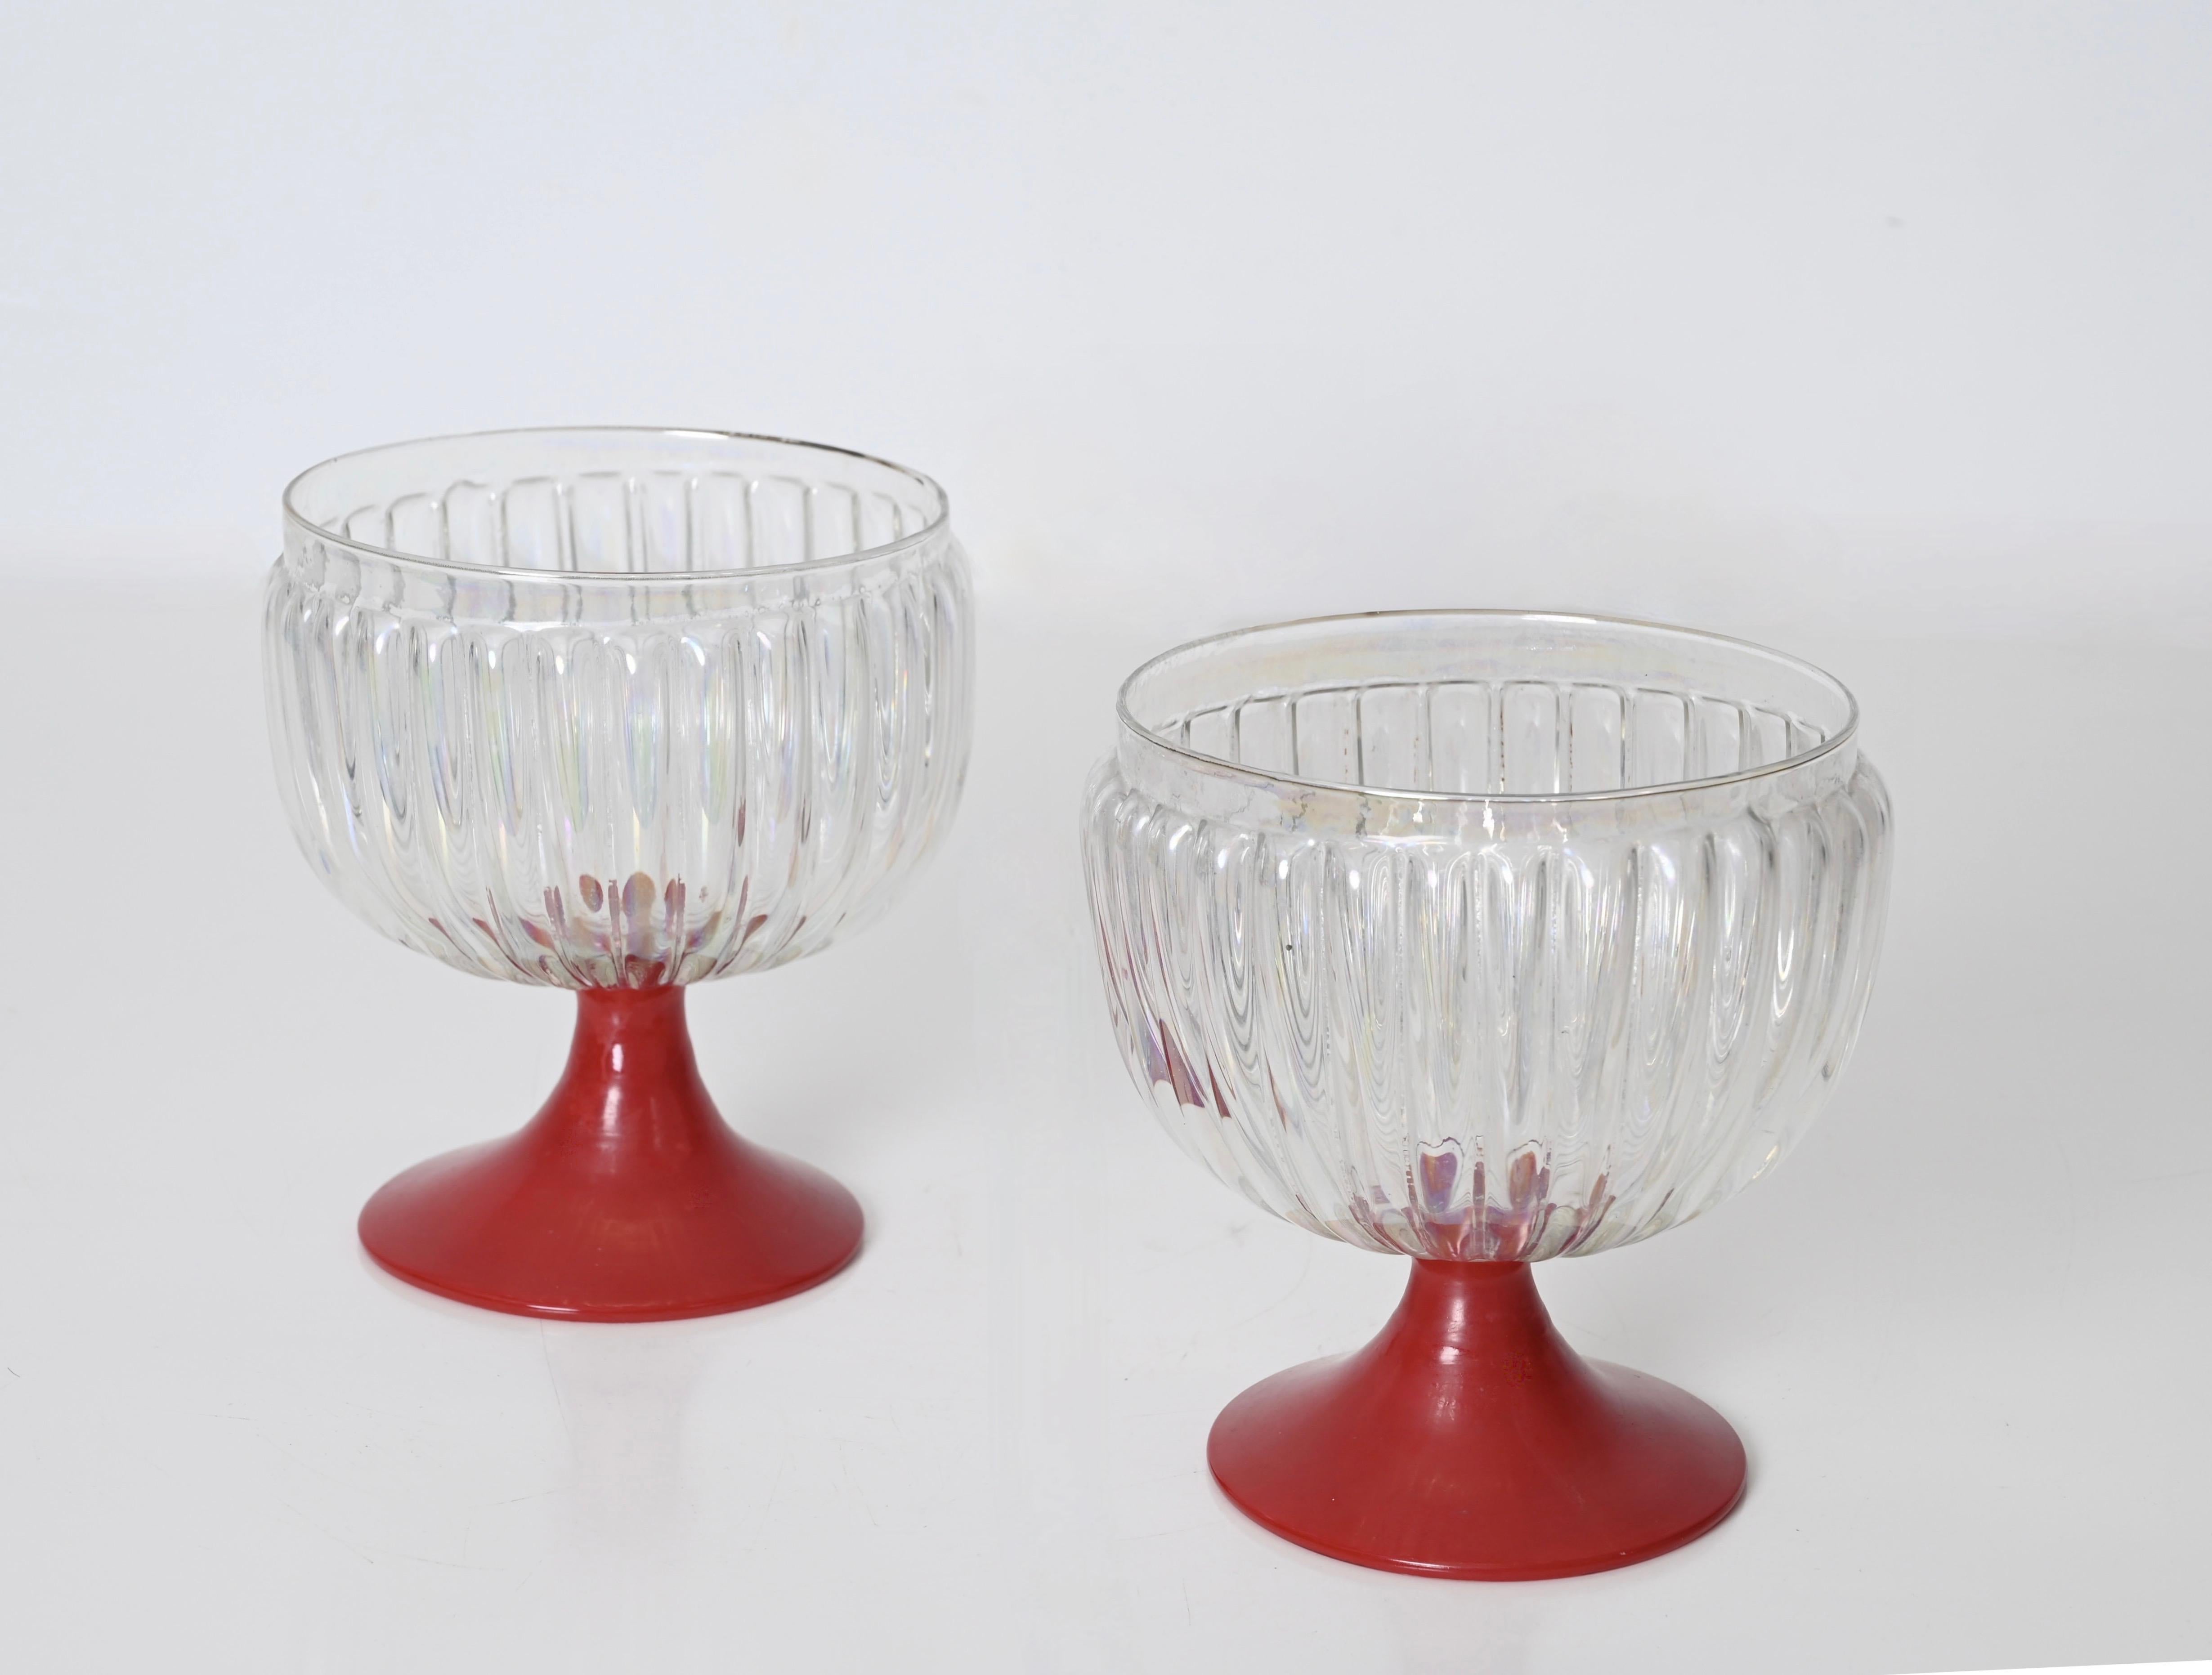 Italian Pair of Large Decorative Murano Red and Iridescent Goblet Glasses, Italy 1940s For Sale